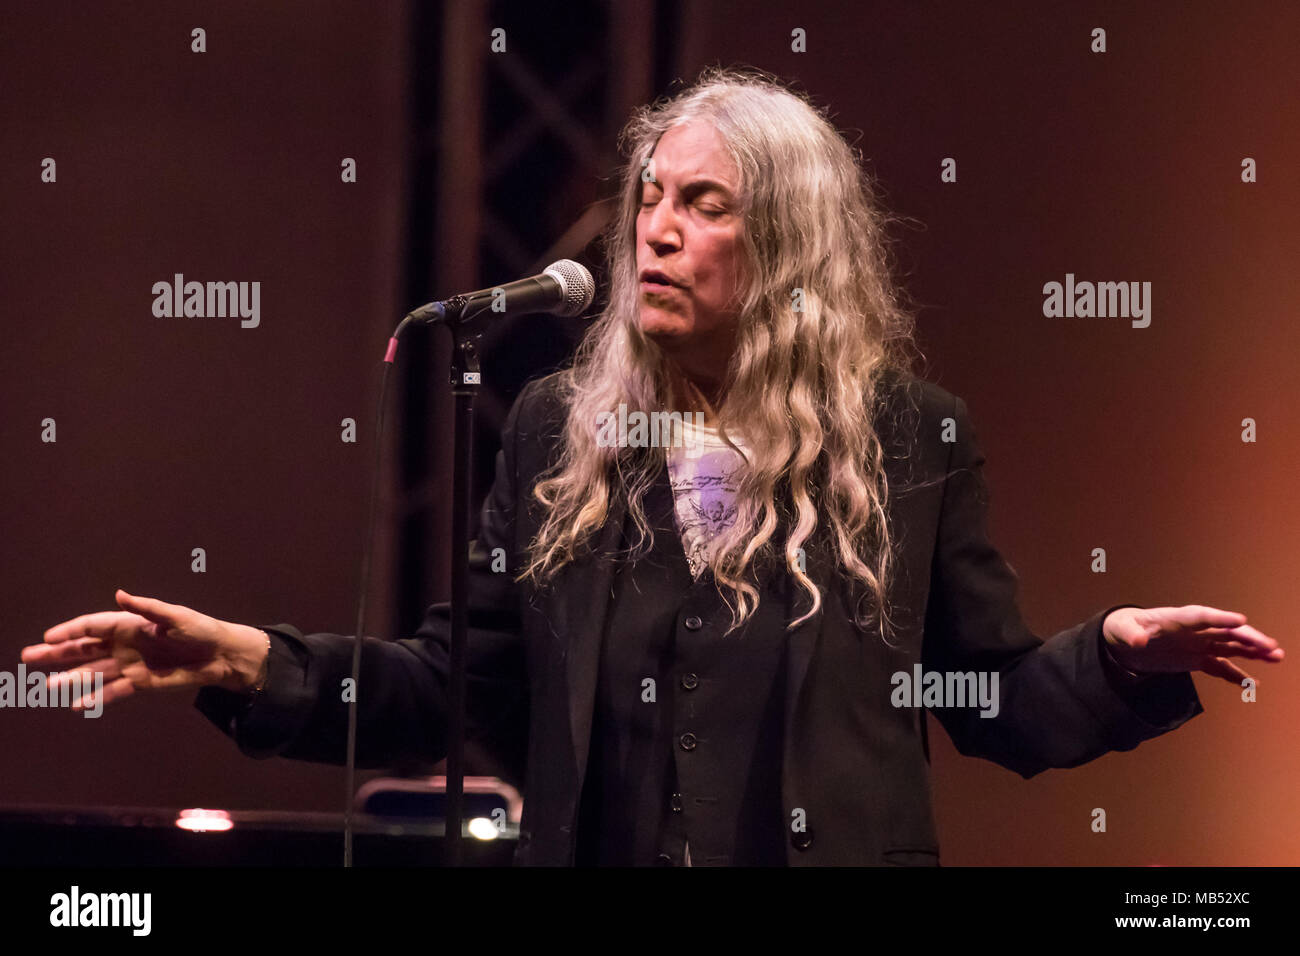 The American punk and rock musician, singer-songwriter, Patti Smith live at the 25th Blue Balls Festival in Lucerne, Switzerland Stock Photo